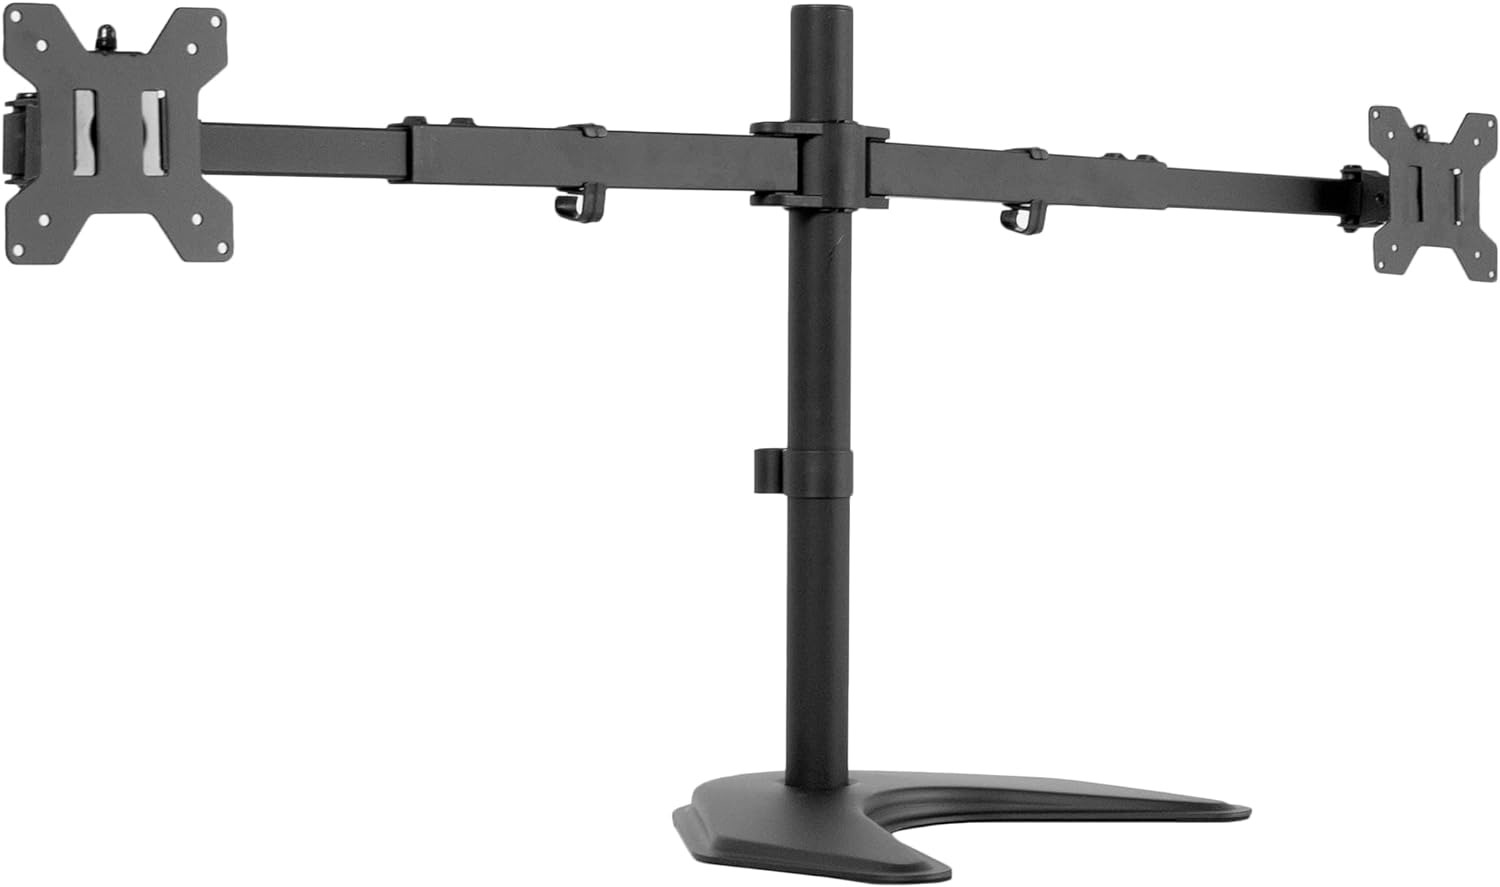 VIVO Premium Dual Ultra Wide LCD LED 27 to 38 inch Monitor Desk Stand, Heavy 2